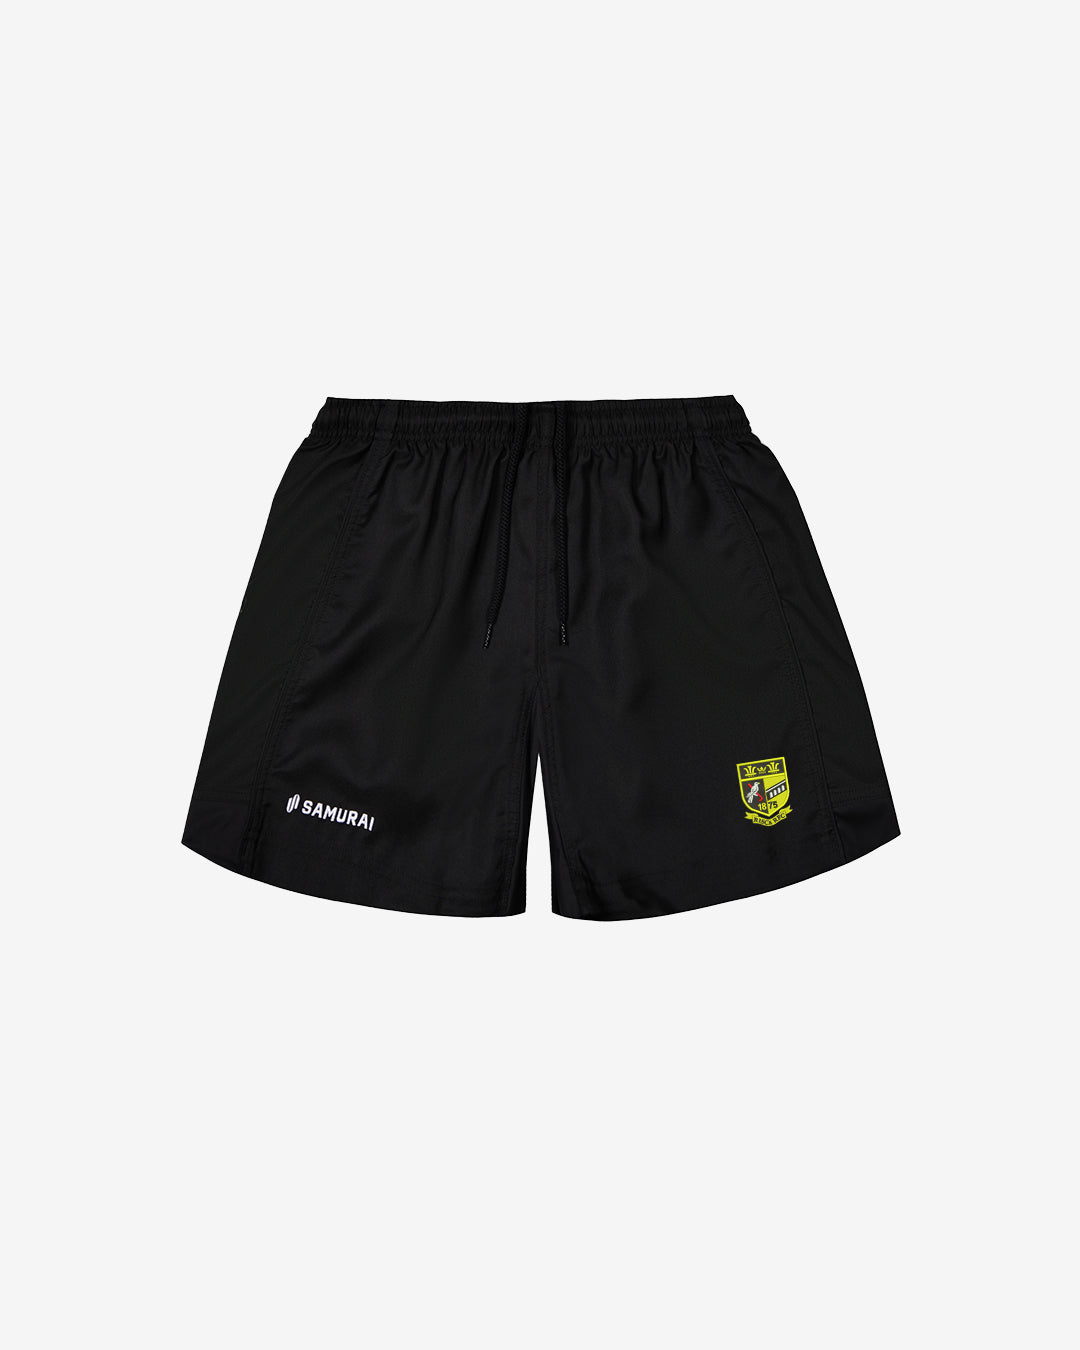 Risca RFC - EP:0119 - Rugby Short - Black